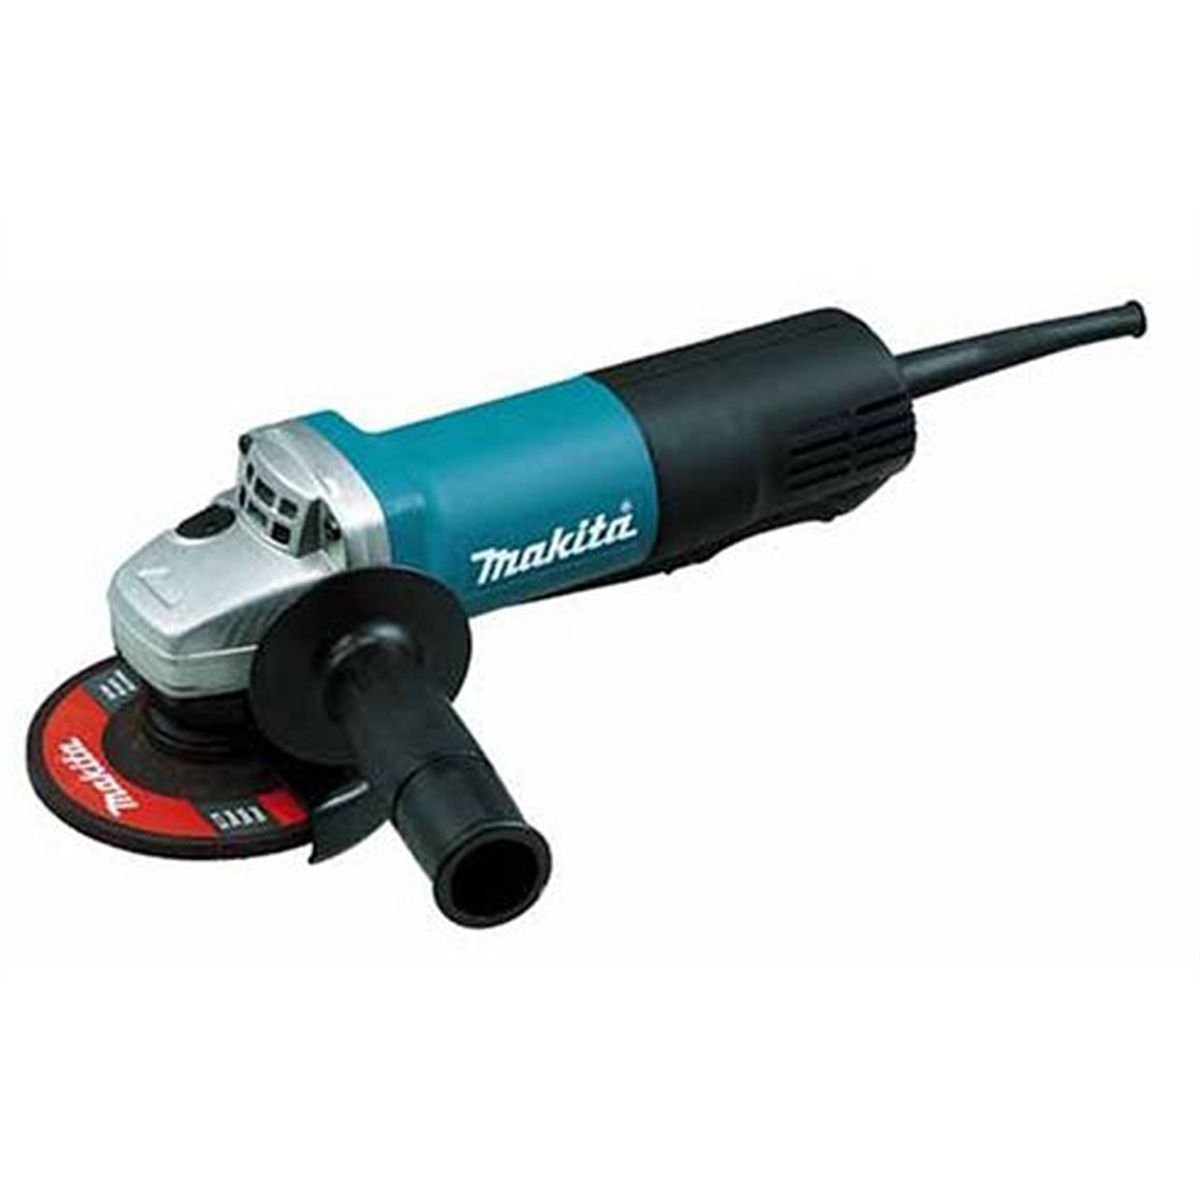 Angle Grinder - 4-1/2 Inch